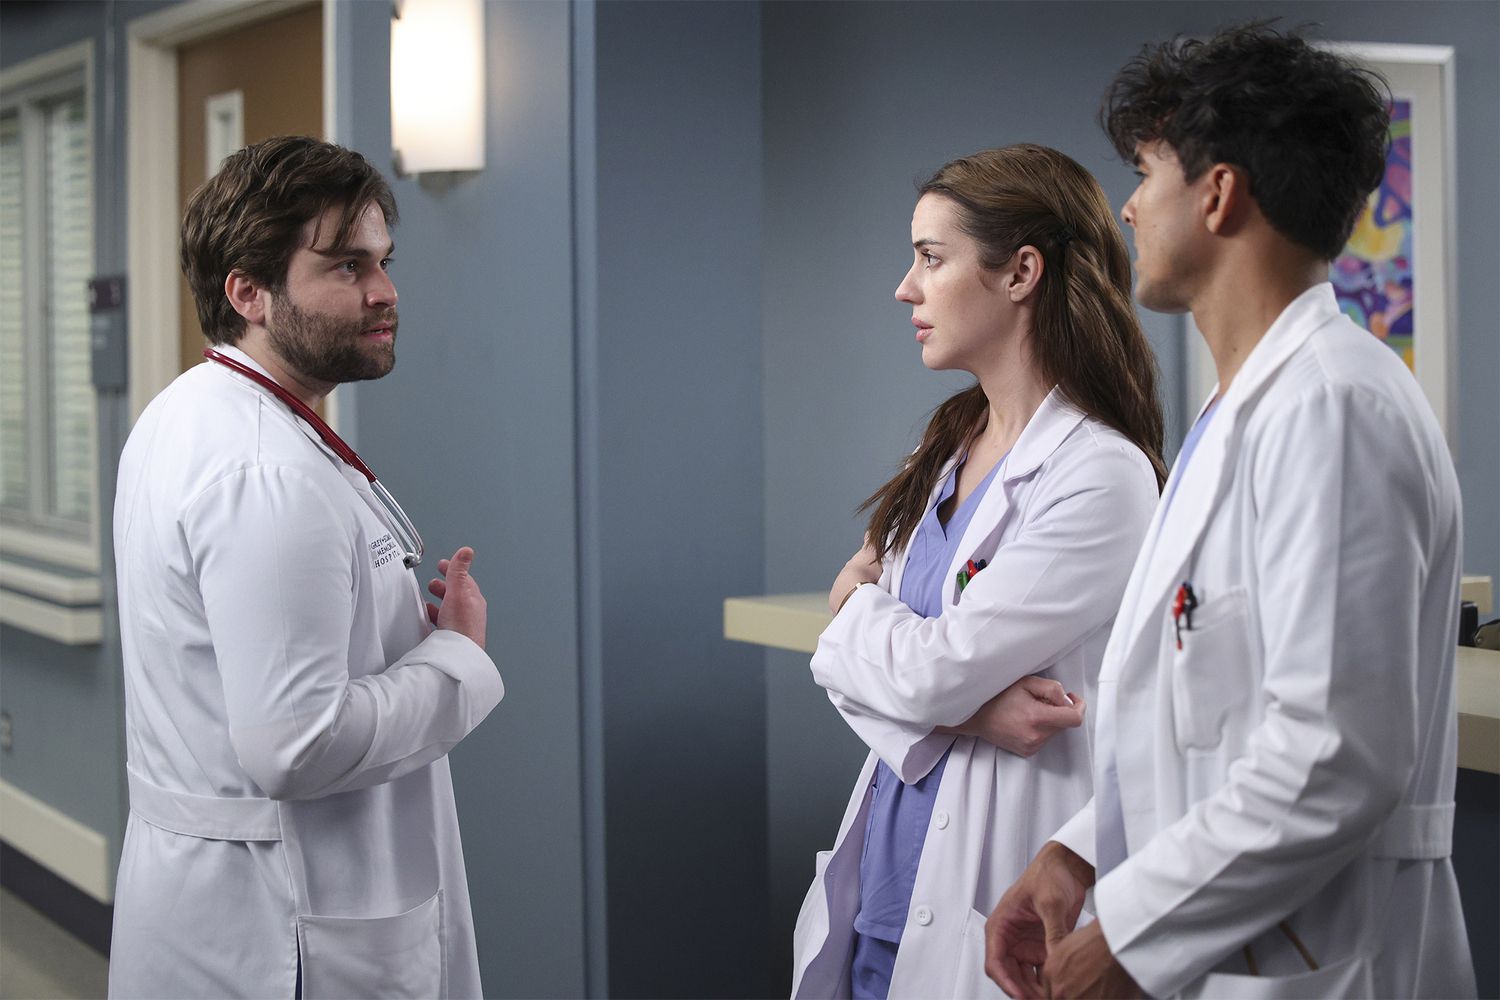 GREY’S ANATOMY - “Gunpowder and Lead” - Amelia takes her personal problems out on her work colleagues, and the threats against Bailey come to a terrifying head. Lucas and Jules make a risky decision on a patient, and Mika struggles with burnout. THURSDAY, APRIL 20 (9:00-10:01 p.m. EDT), on ABC. (ABC/Raymond Liu) JAKE BORELLI, ADELAIDE KANE, NIKO TERHO